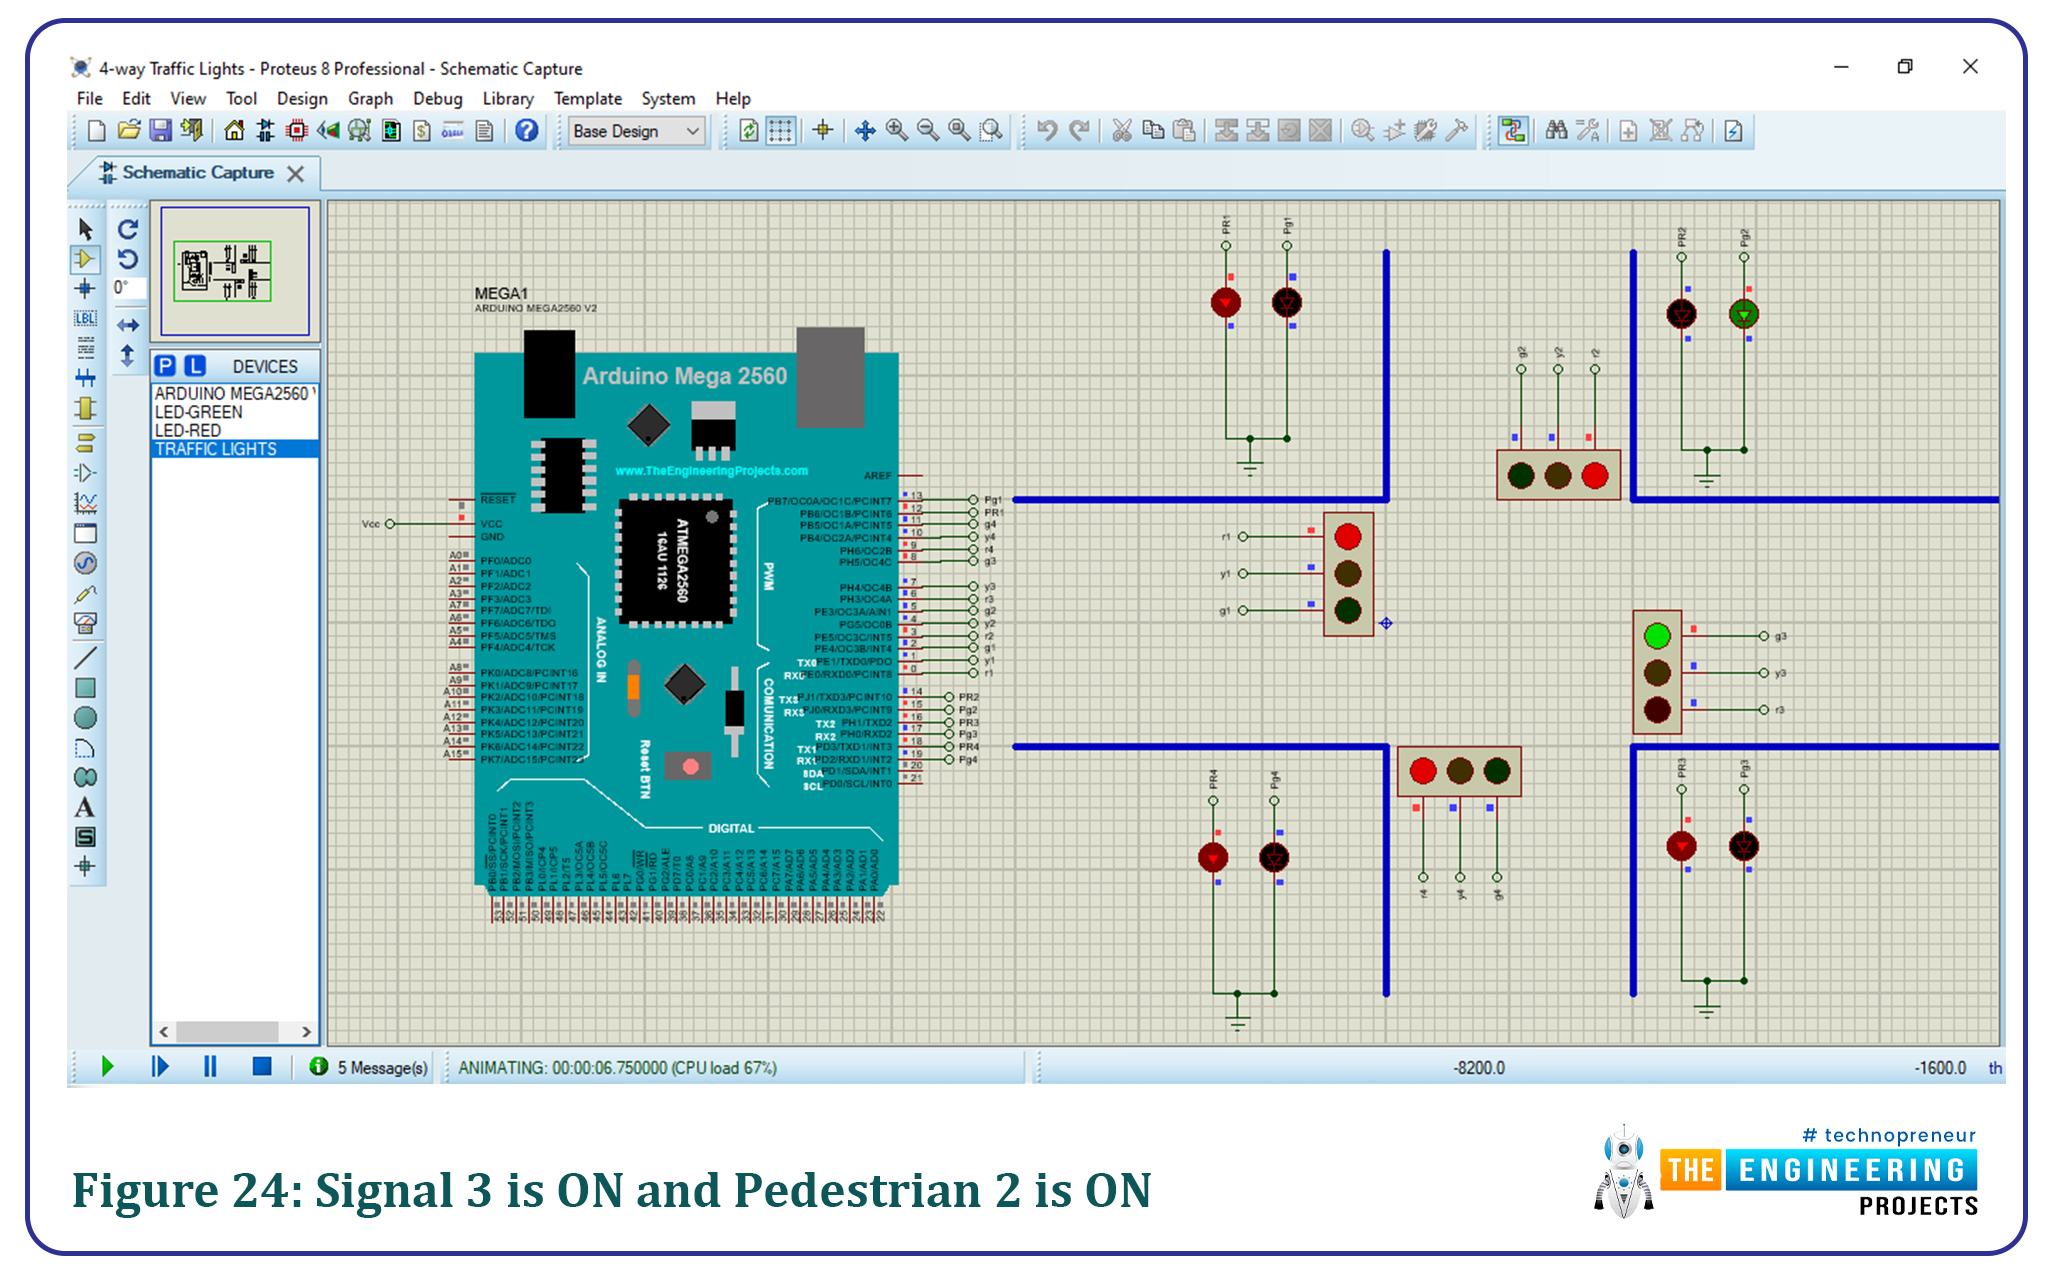 4 way traffic light, Software to install, Project overview, Components needed, Component details, Arduino mega, Traffic lights, Proteus simulation of traffic lights, Arduino code, Void setup, Results/working, Signal 3 is ON and pedestrian 2 is ON, Yellow light showing transition, Signal 1 is ON while Pedestrian 4 is ON 